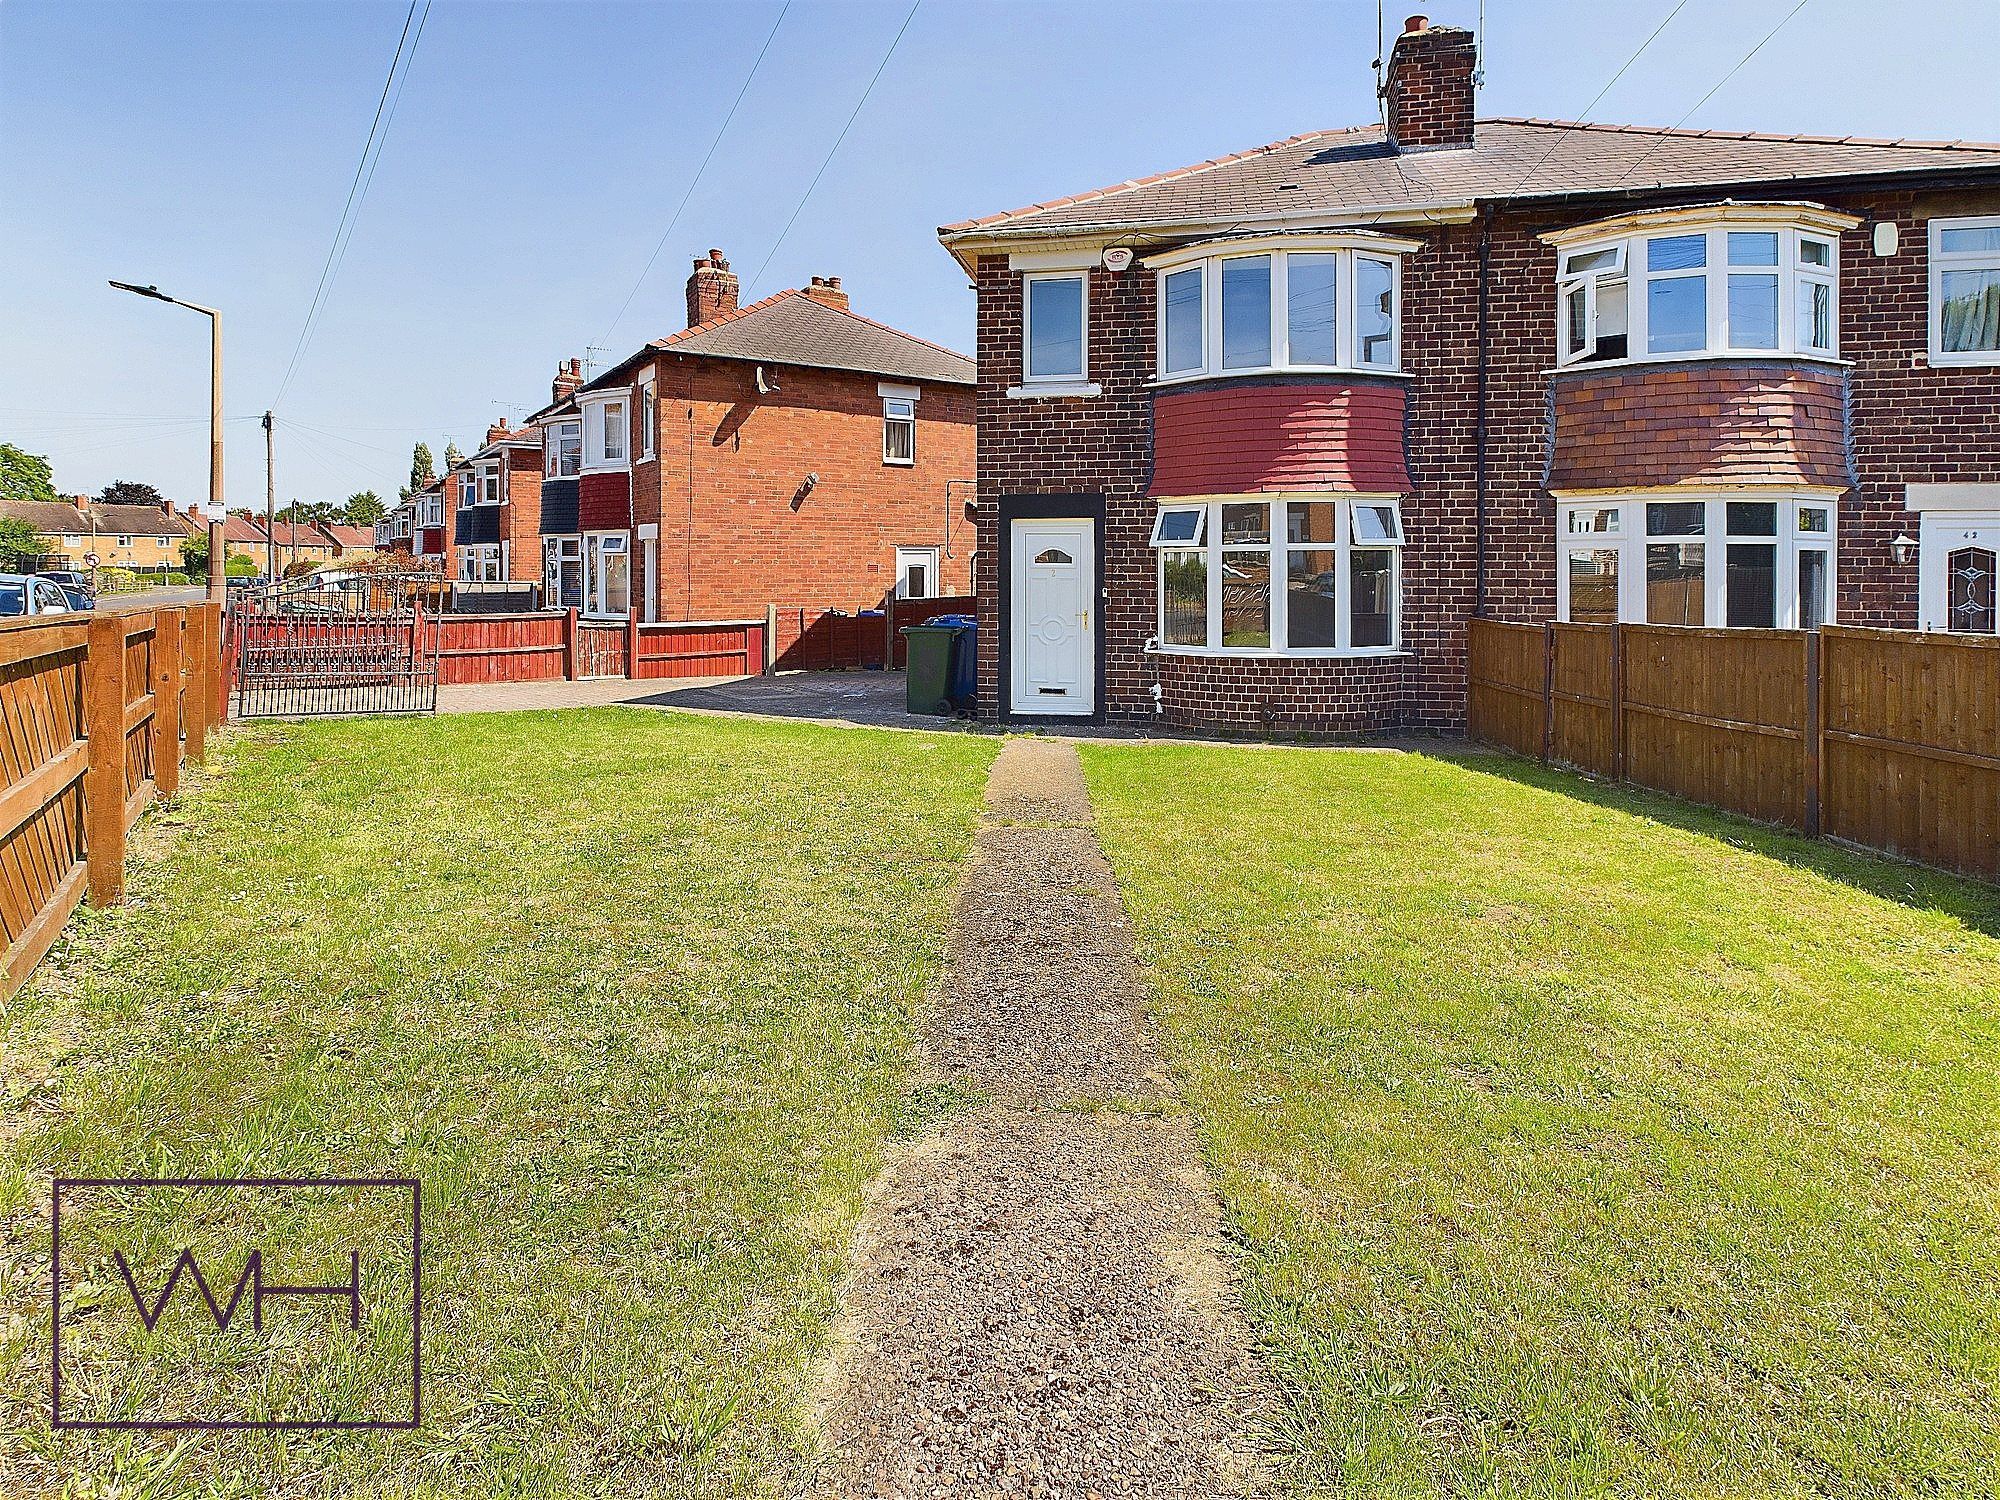 Wensleydale Road, Scawsby, Doncaster, DN5 8SS